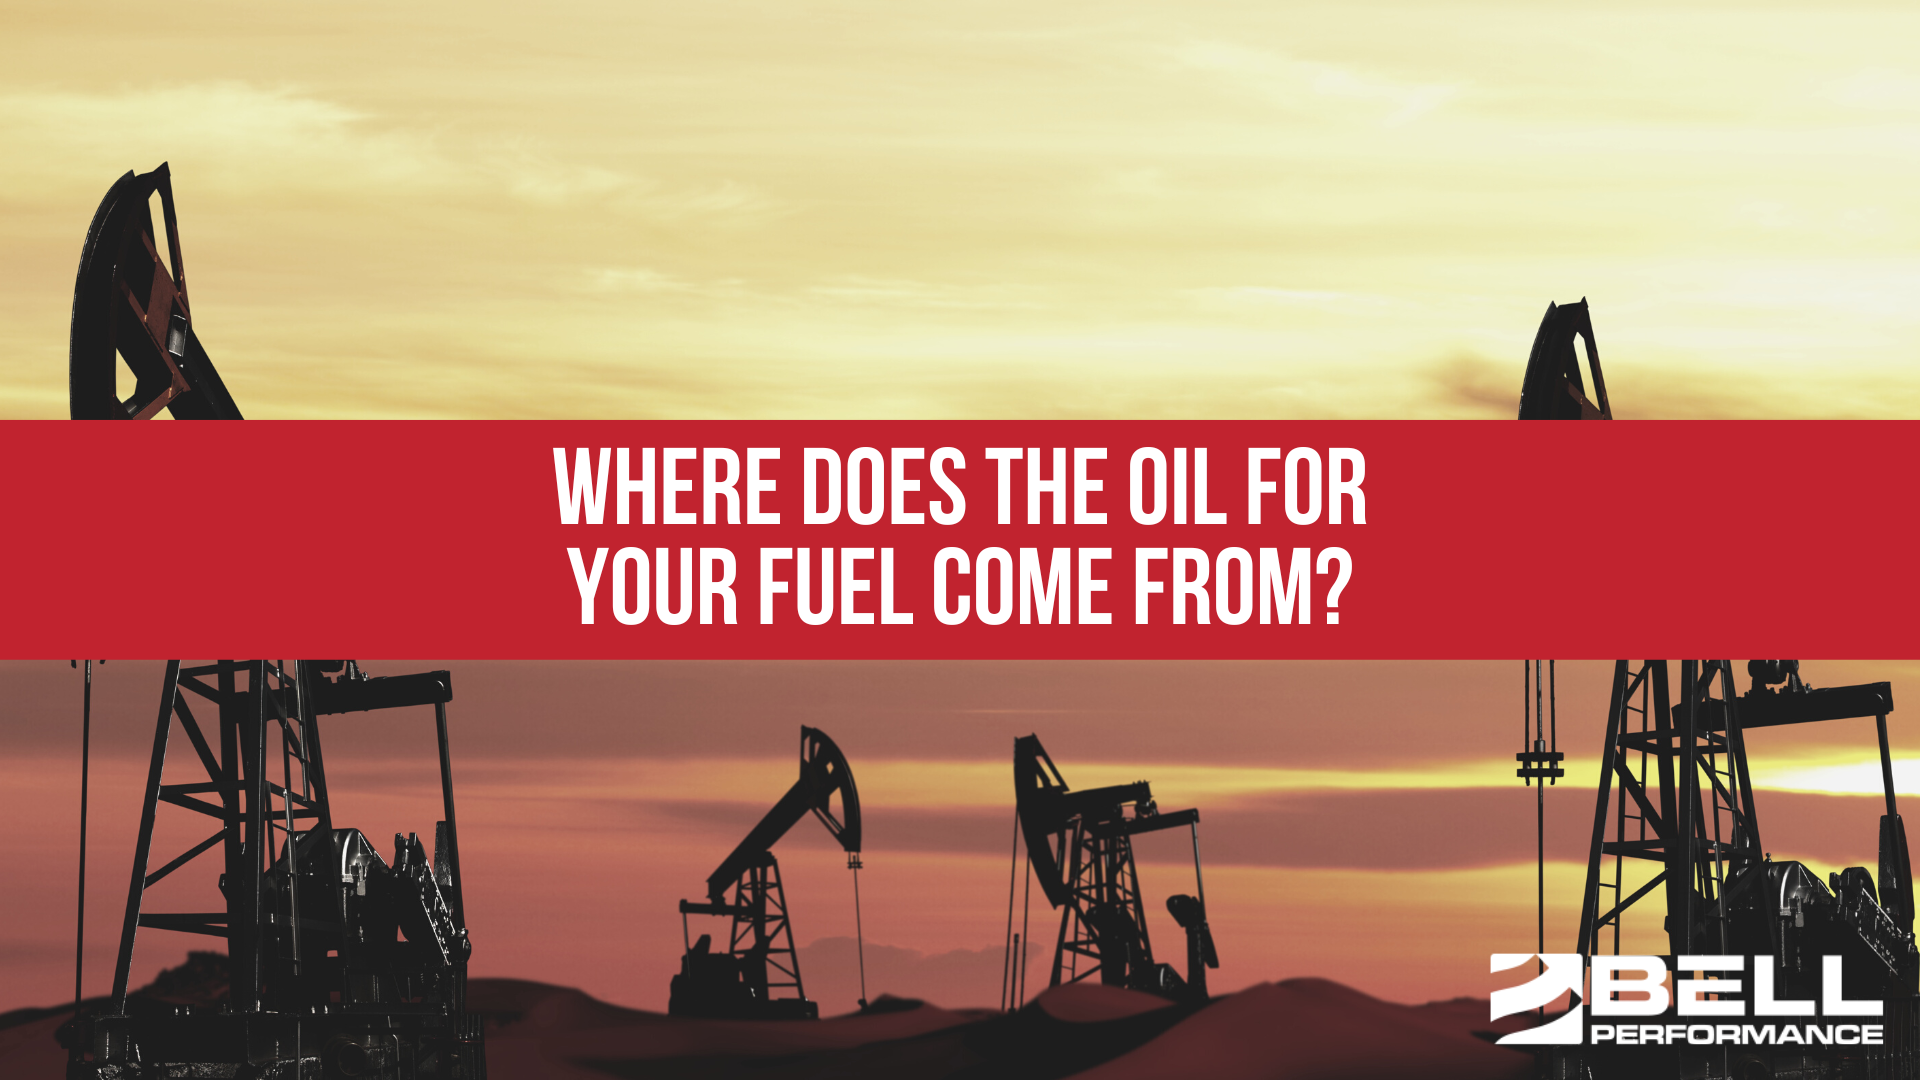 Where does the oil for your fuel come from?